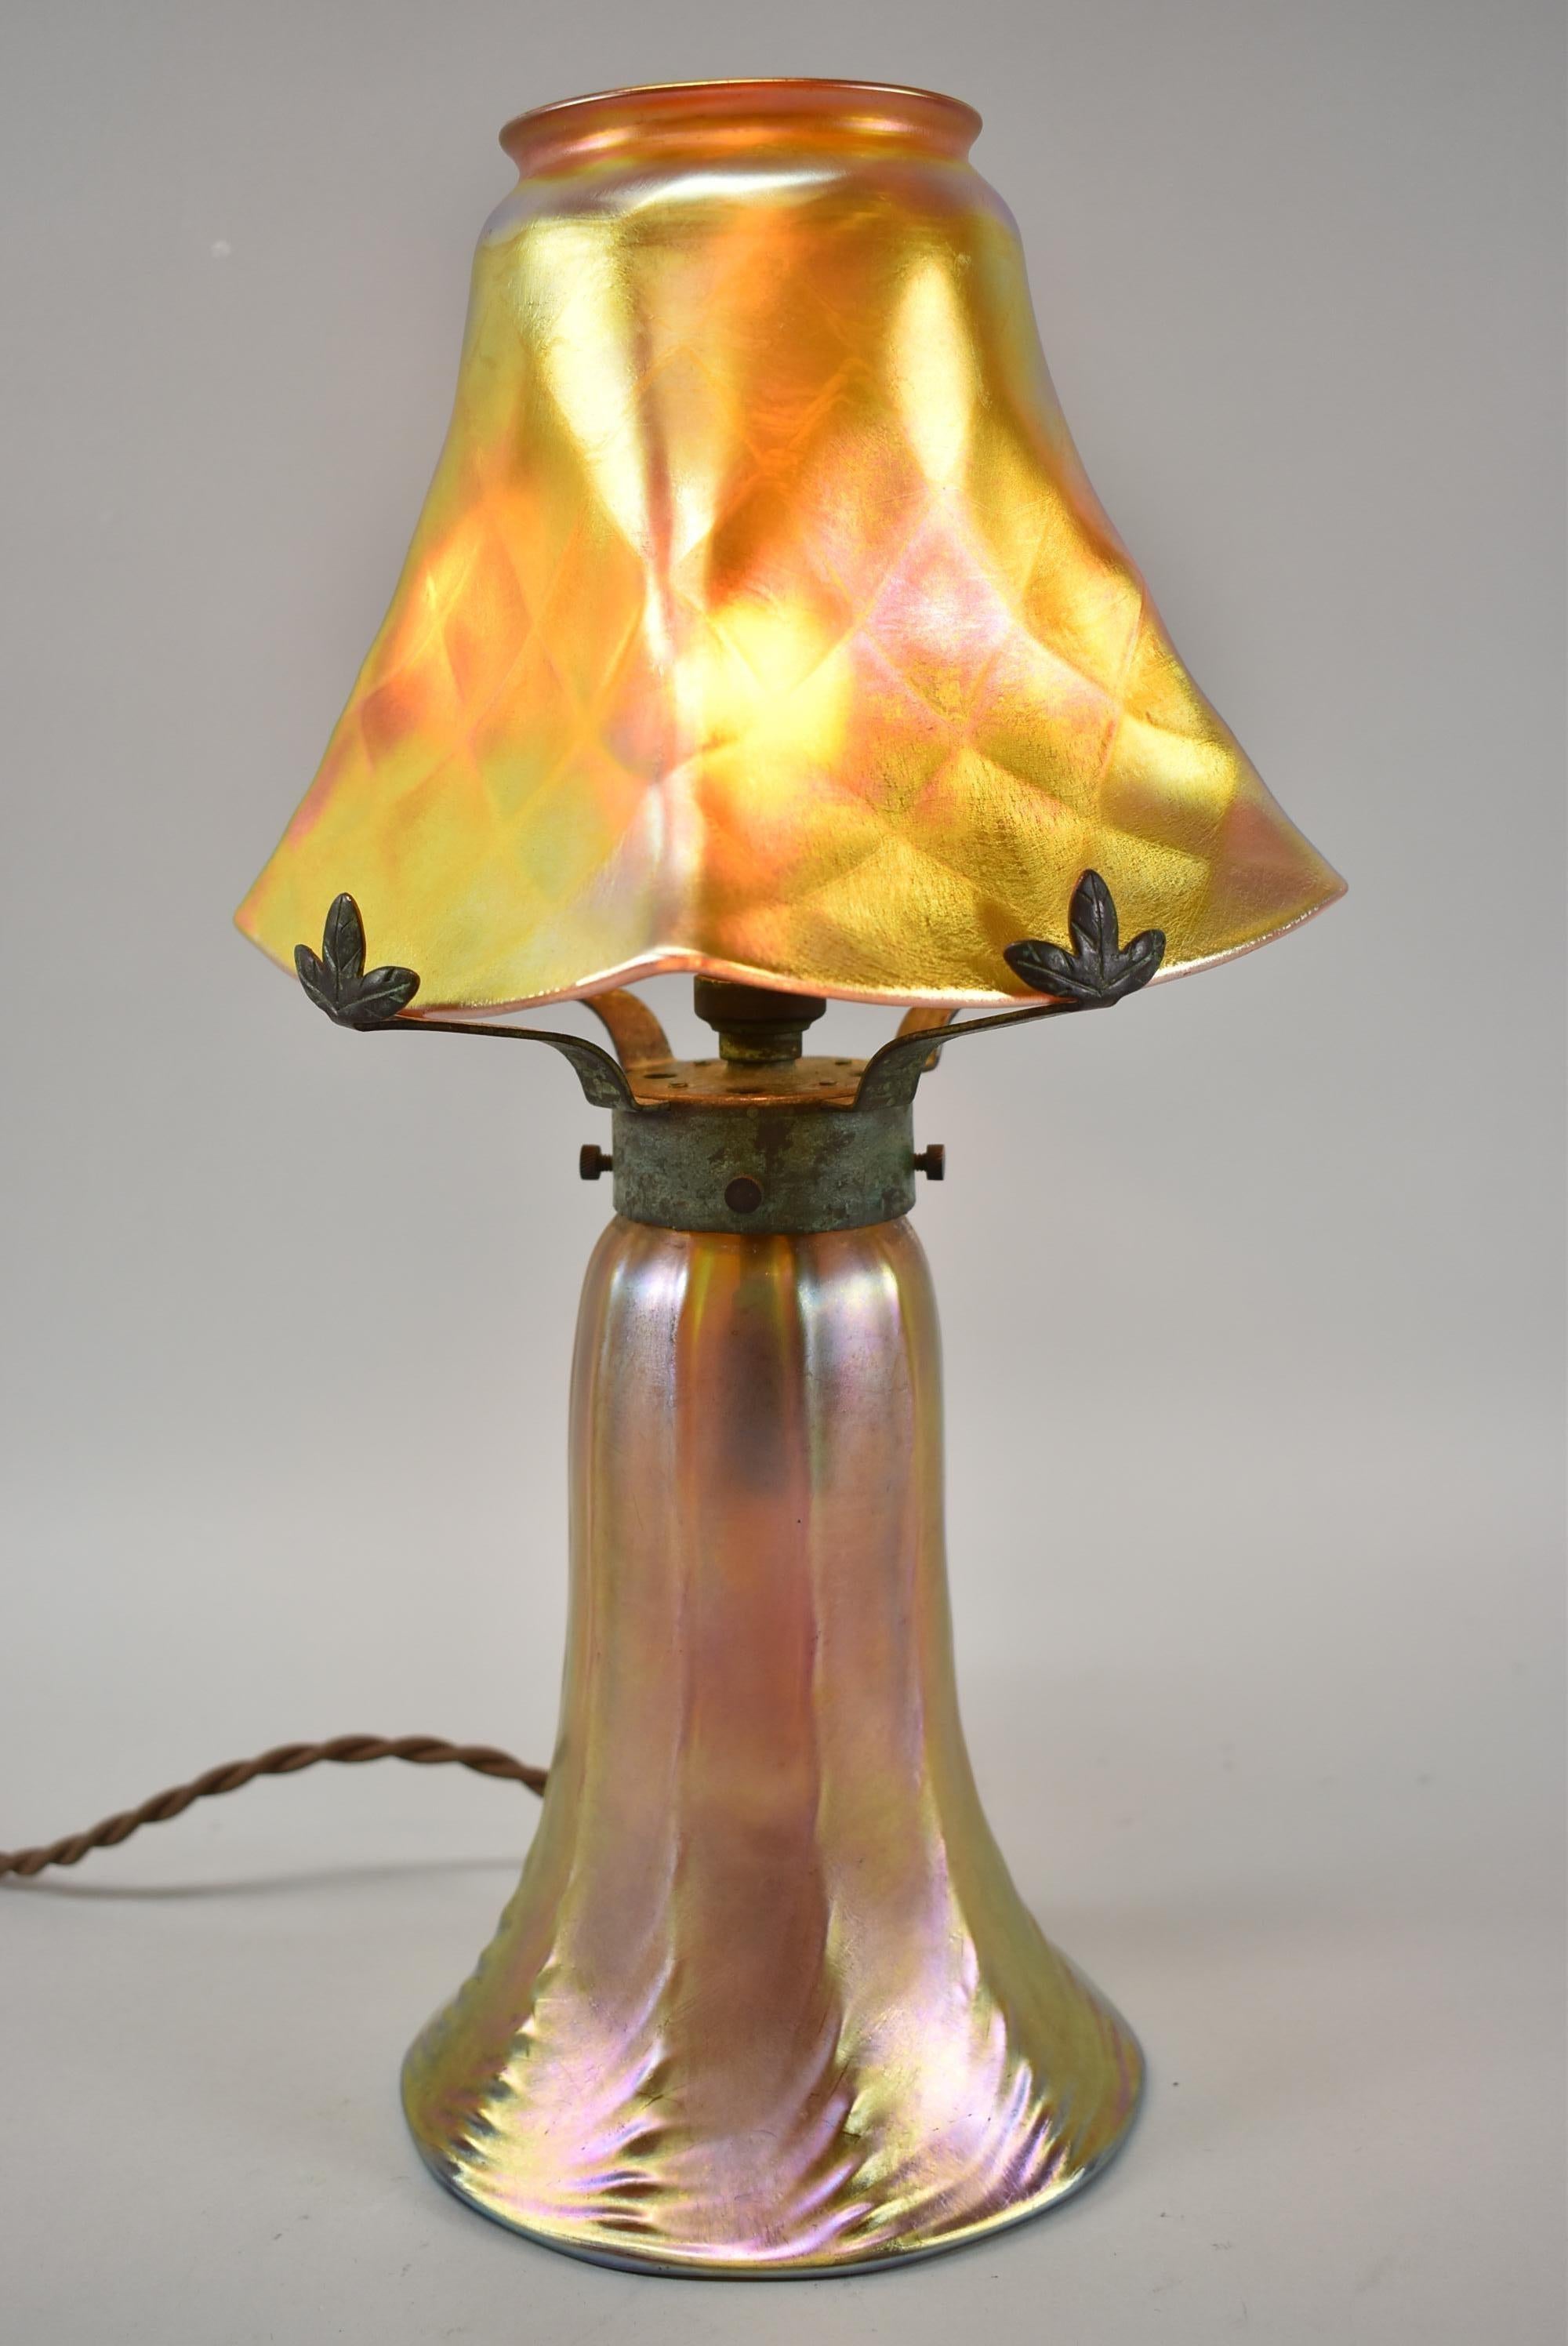 Quezal art glass table lamp with single socket. Signed on the fitter. Brass mounts with a green bronze patina. Rewired.